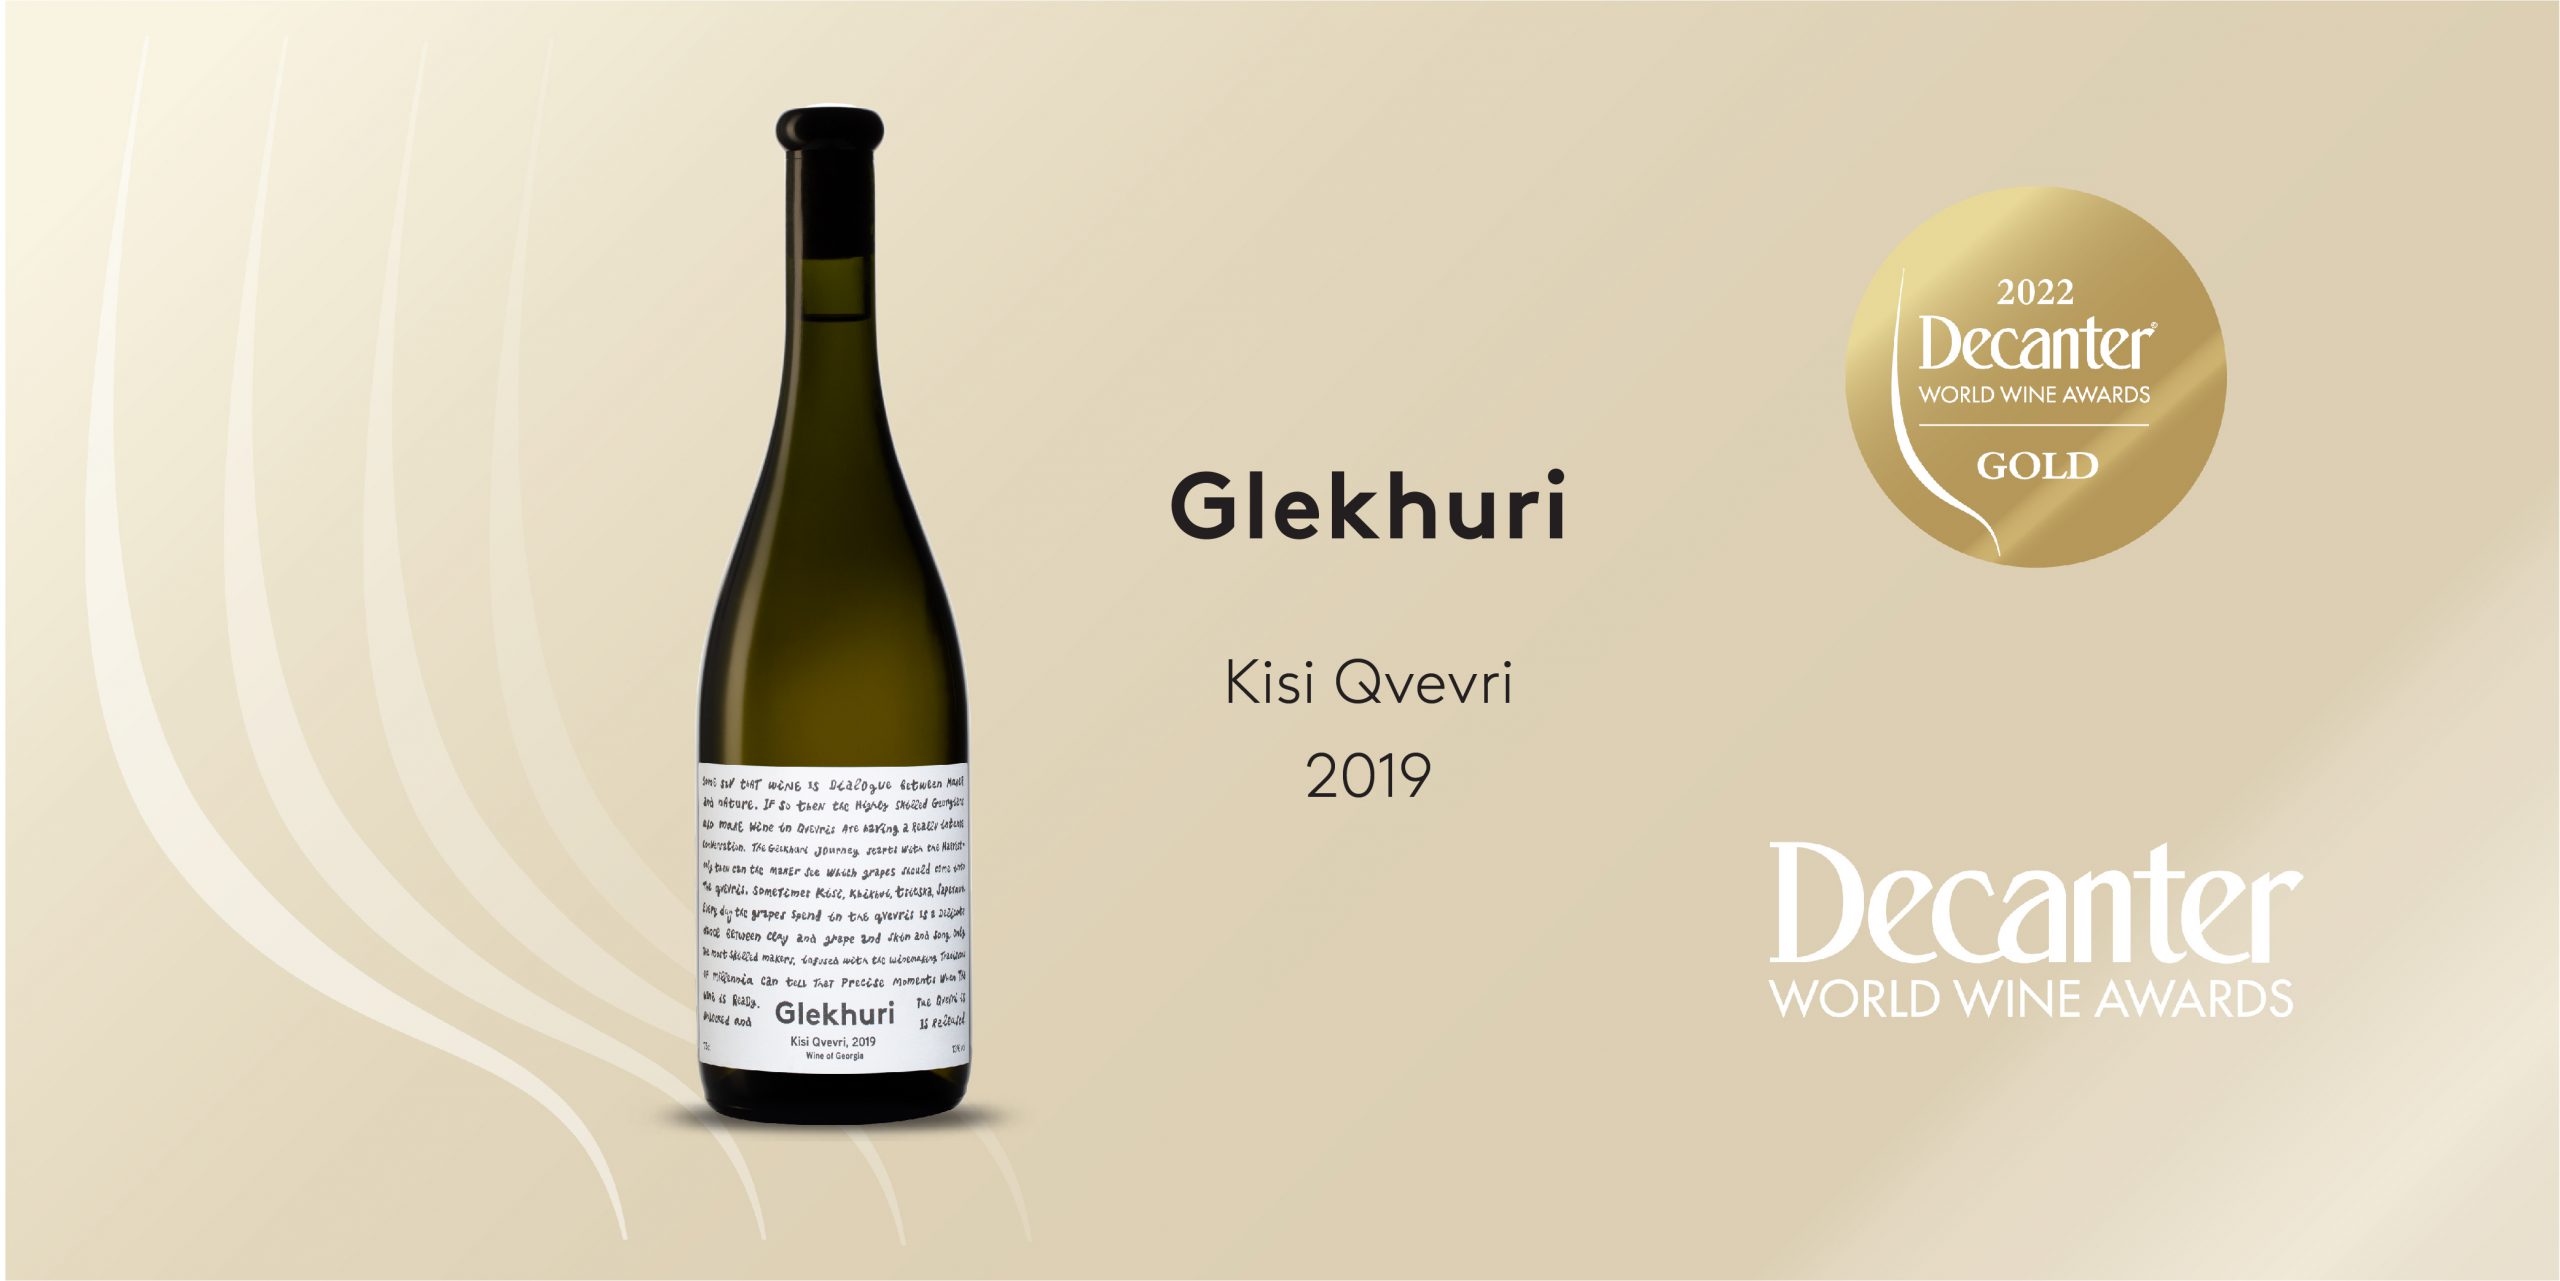 Teliani Valley has been awarded a Gold medal at the Decanter 2022